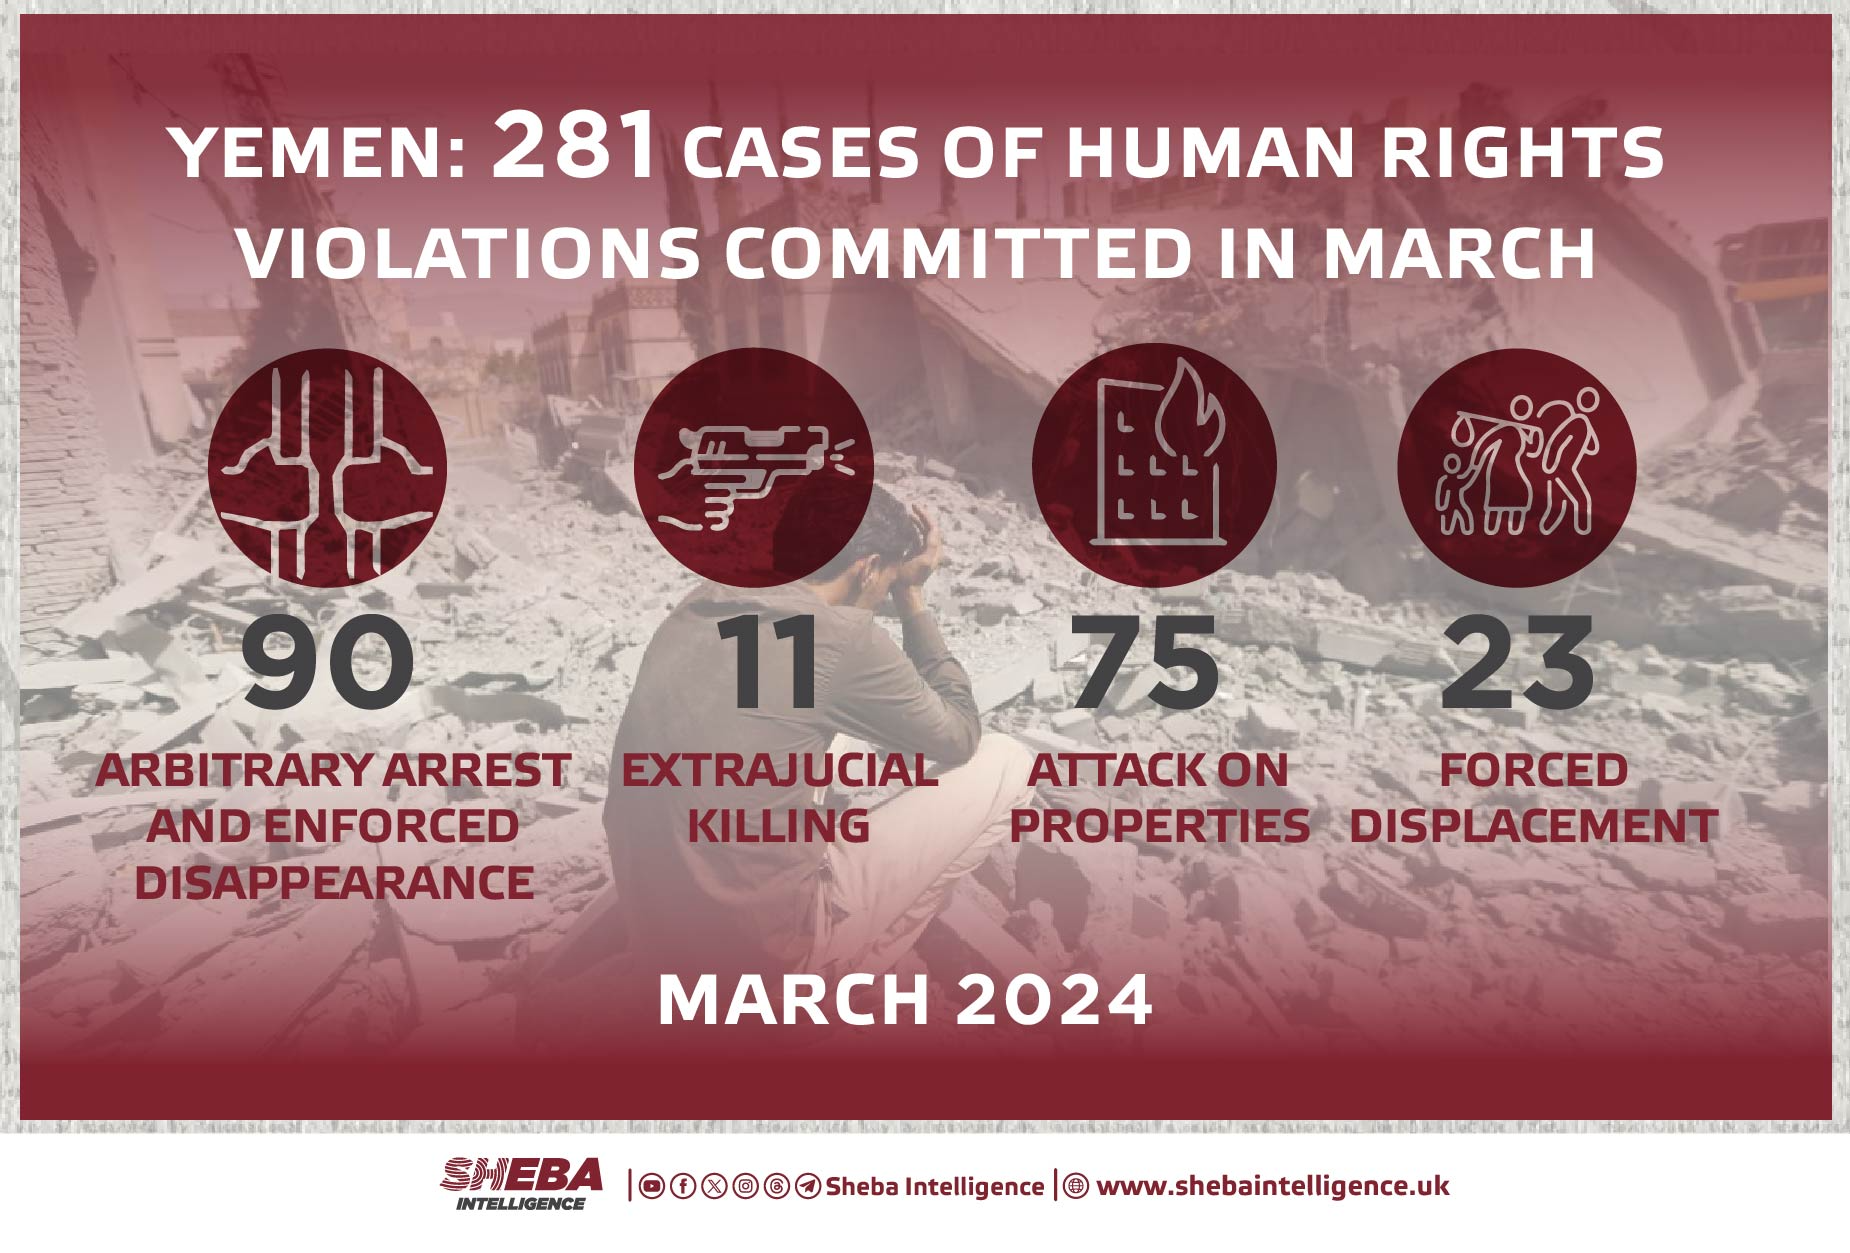 Yemen: 281 Cases of Human Rights Violations Committed in March